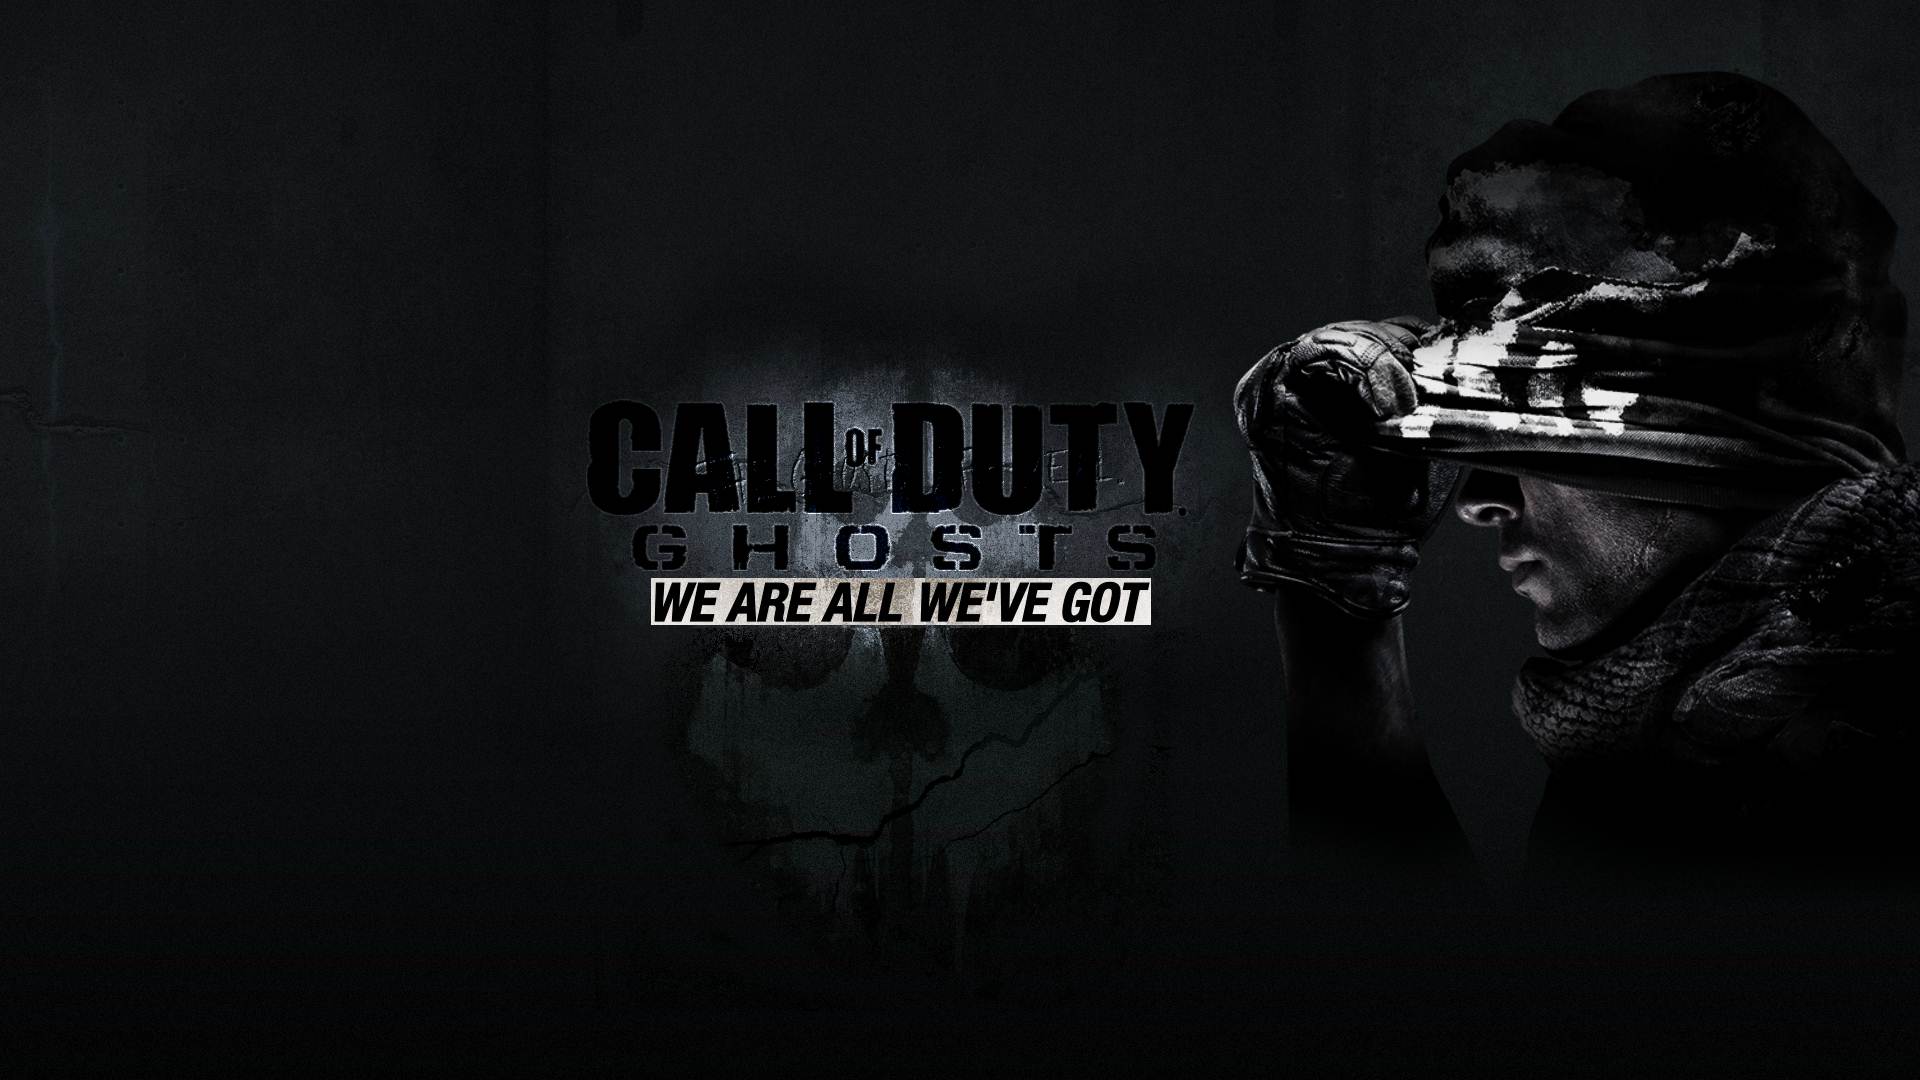 Free download Call Of Duty Ghost HD Wallpaper 1080p Image amp